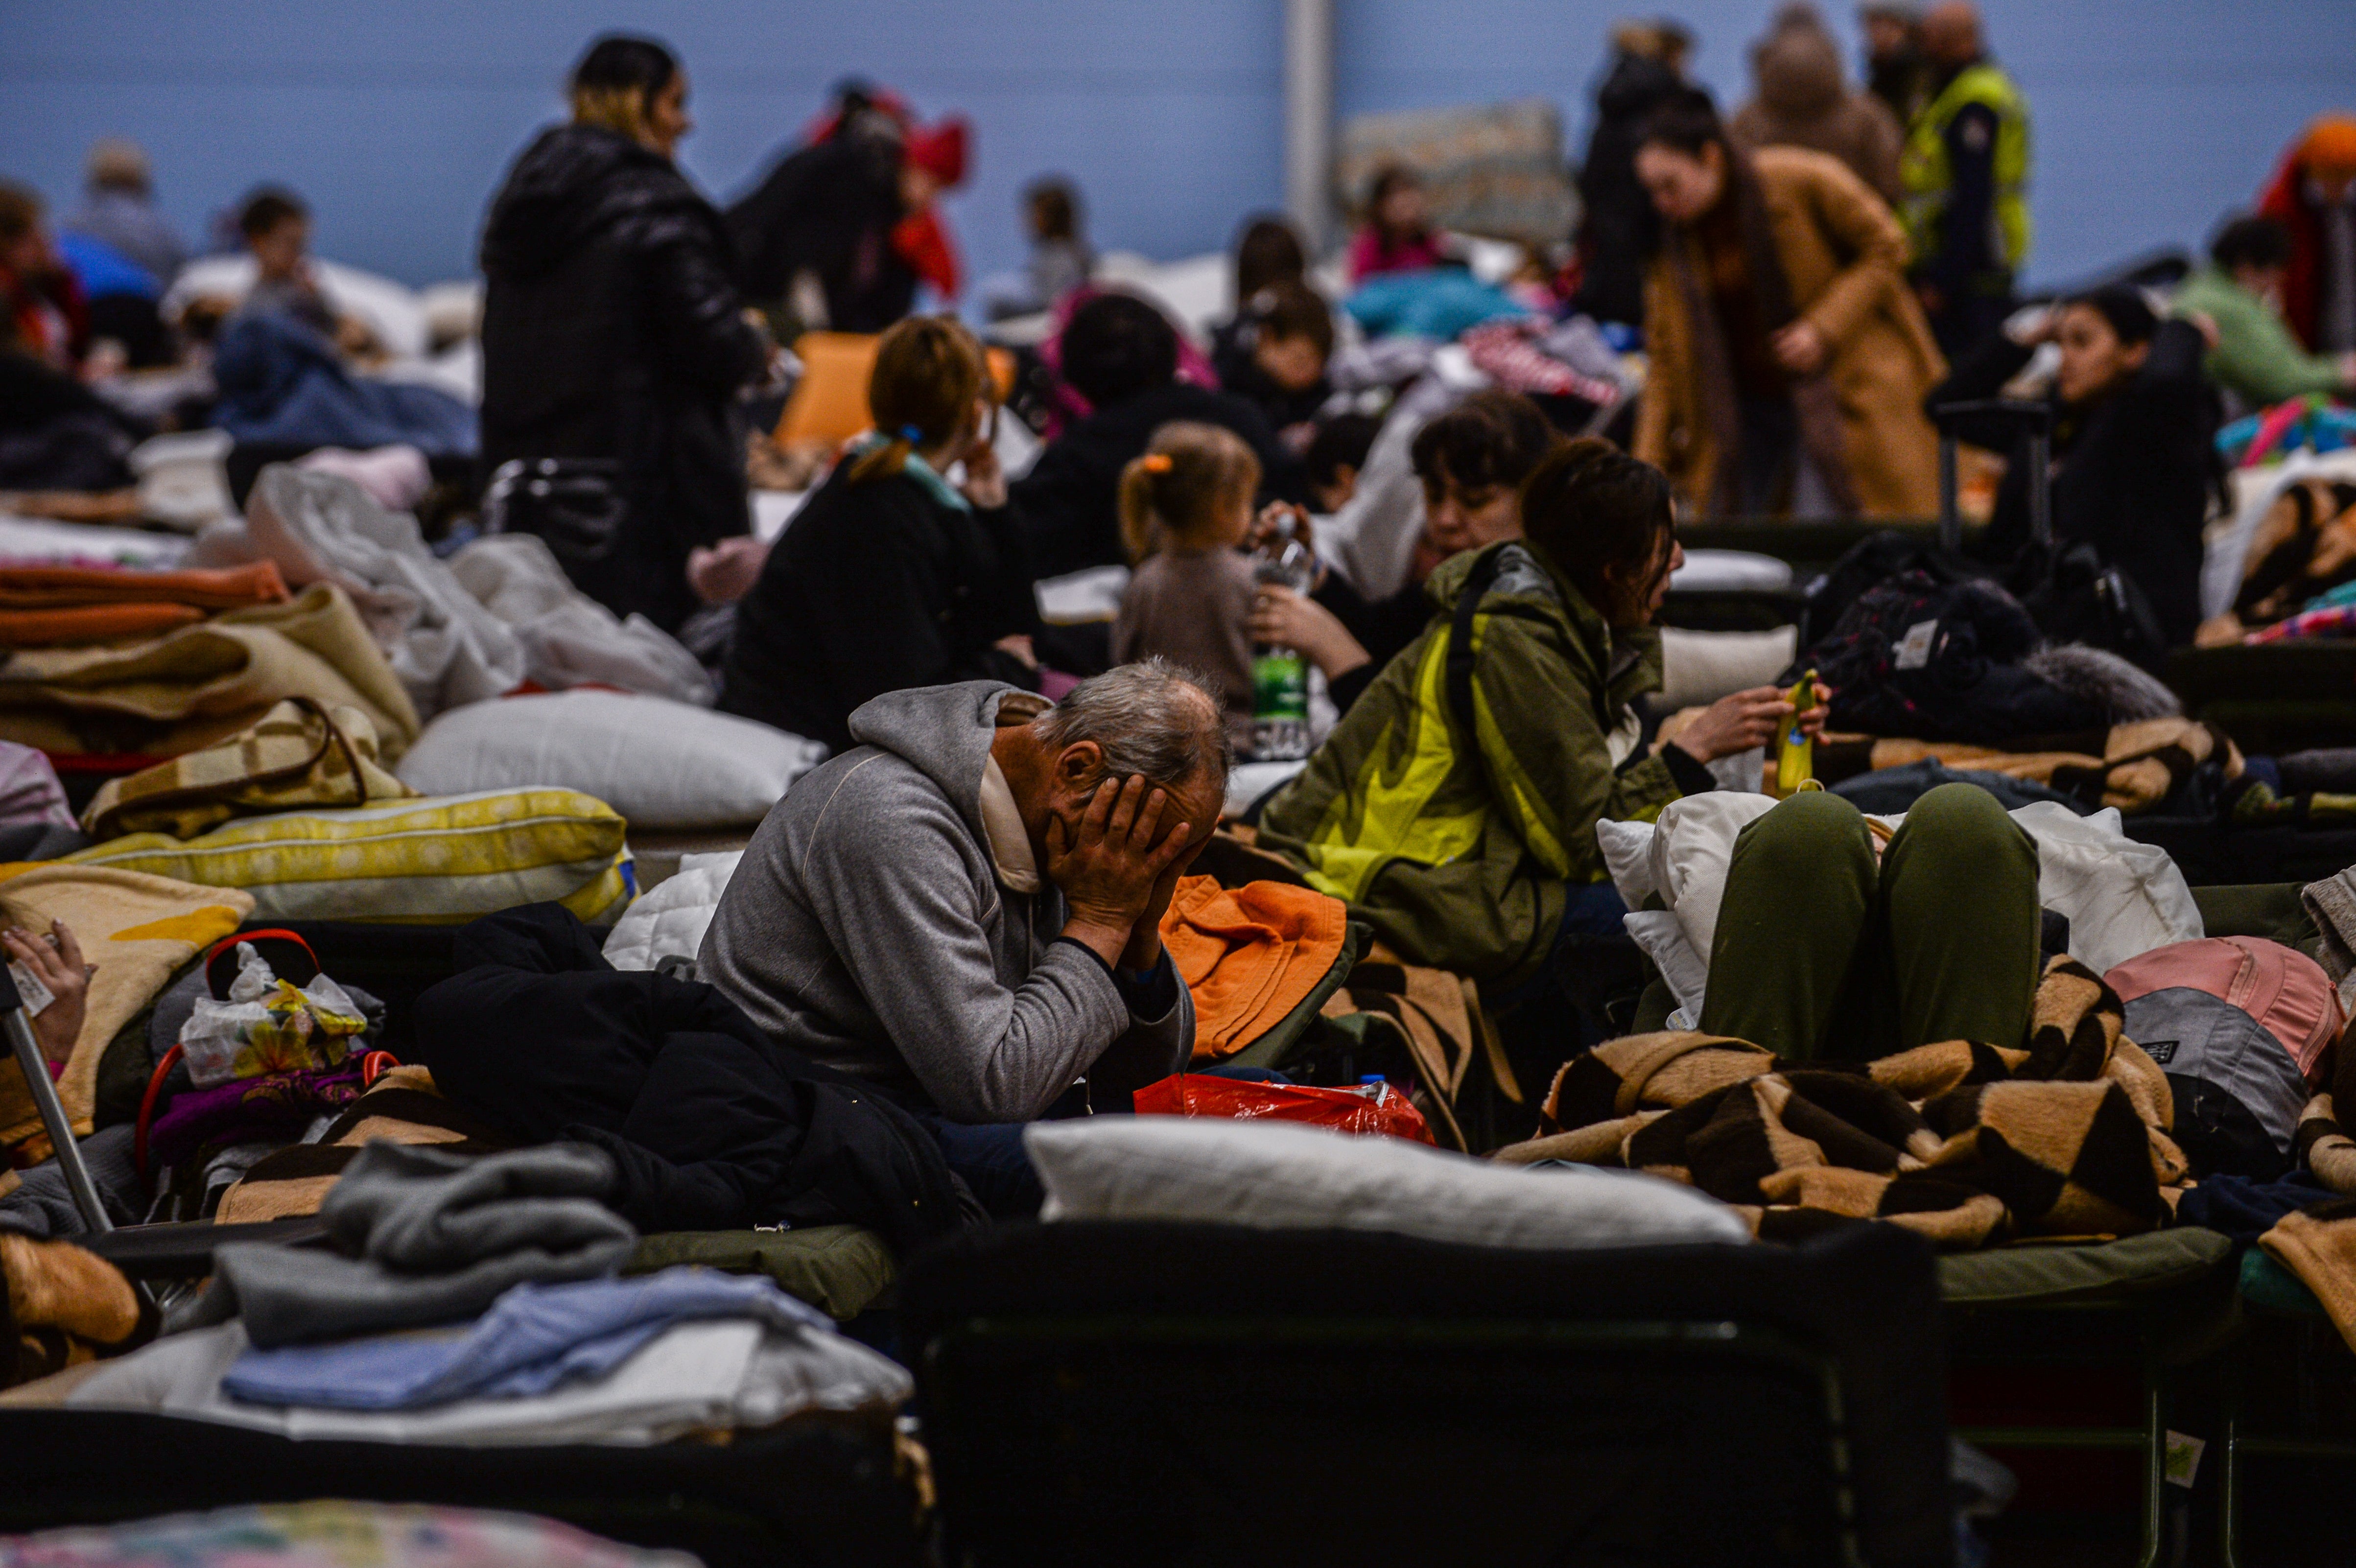 Refugees inside a temporary shelter that was an abandoned Tesco supermarket in Przemysl, Poland